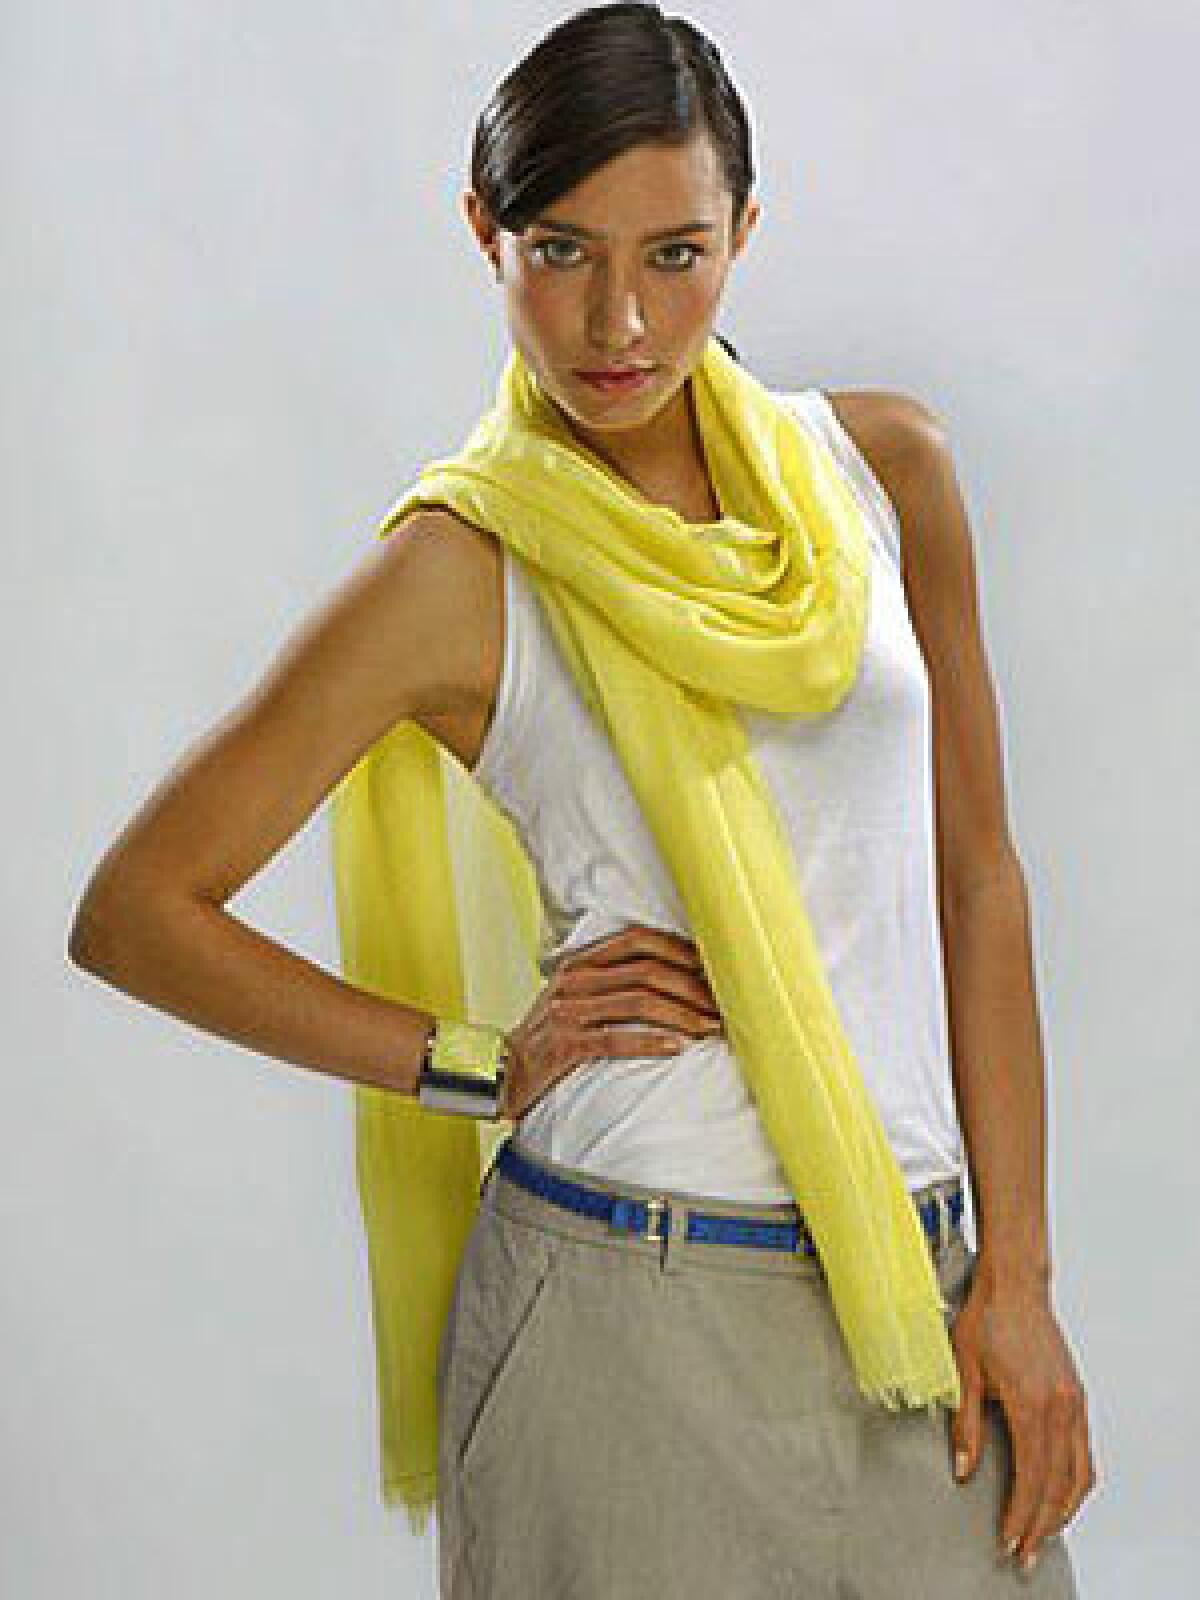 BRIGHT AND SHINY: Theory pants, $235 at www.neimanmarcus.com; MIH tank top, $63, Club Monaco scarf, $99, and cuff, $59, www.clubmonaco.com.